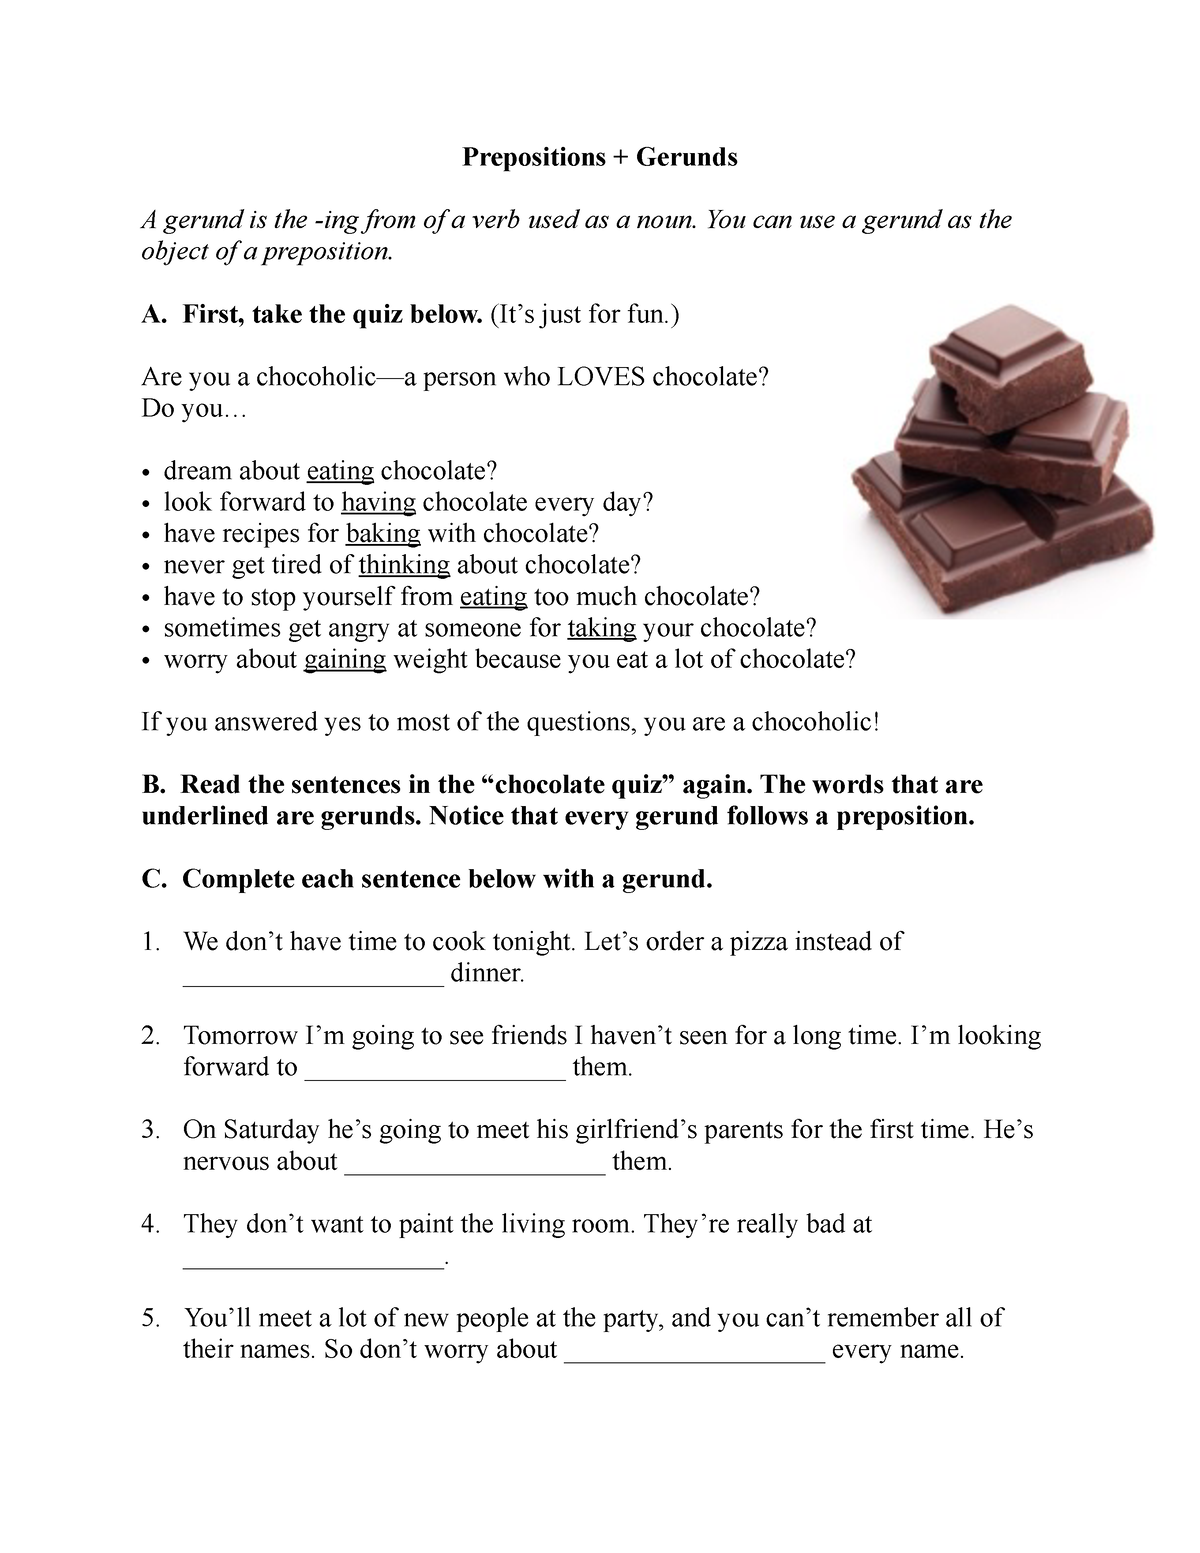 Preposition gerund Chocolate Prepositions Gerunds A Gerund Is The ing From Of A Verb Used 